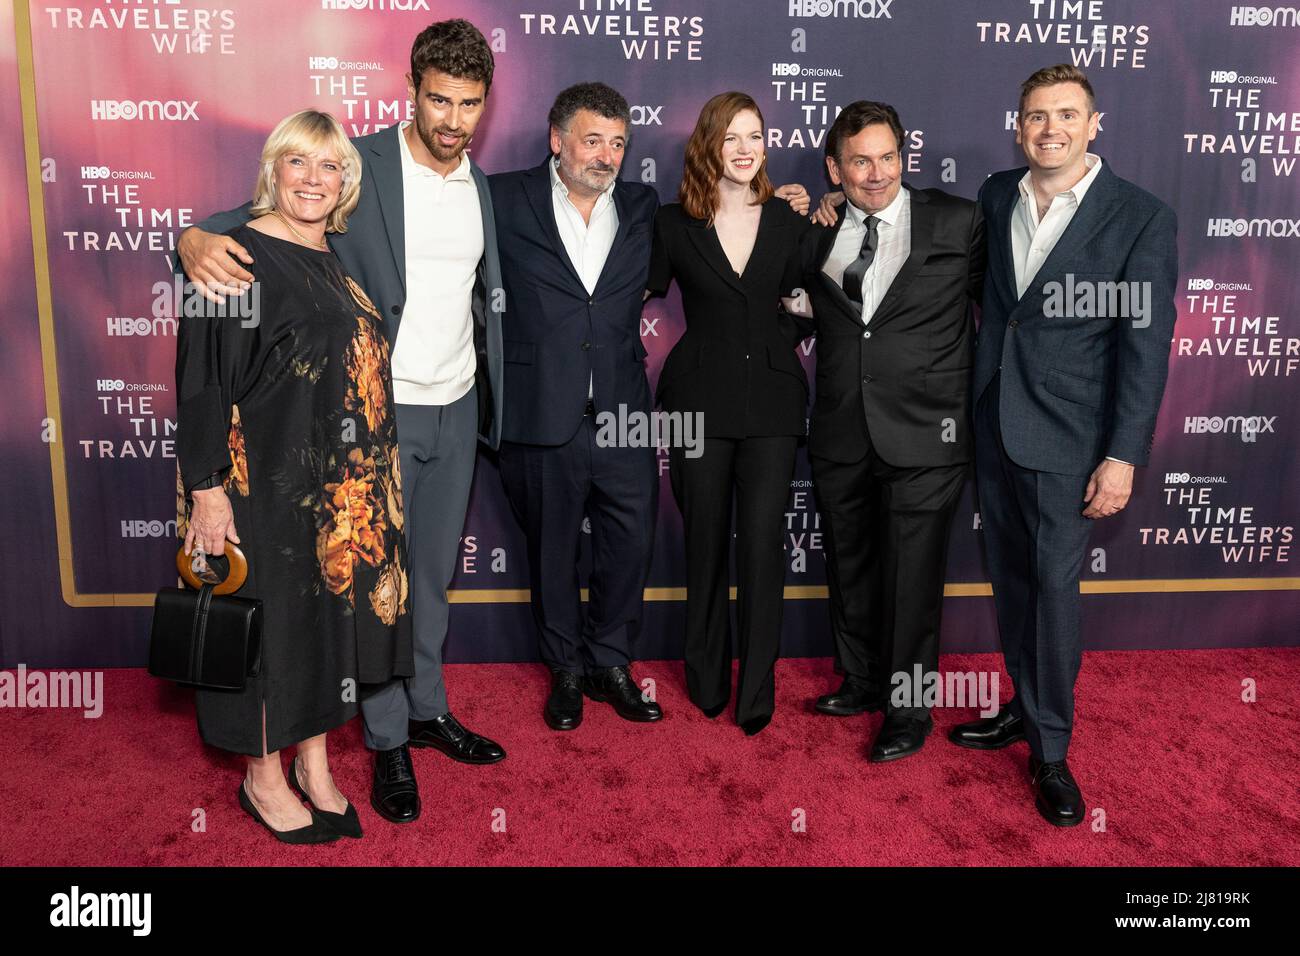 New York, NY - May 11, 2022: Sue Vertue, Theo James, Steven Moffat, Rose Leslie, David Nutter, Brian Minchin attend HBO's The Time Traveler's Wife premiere at Morgan Library Stock Photo